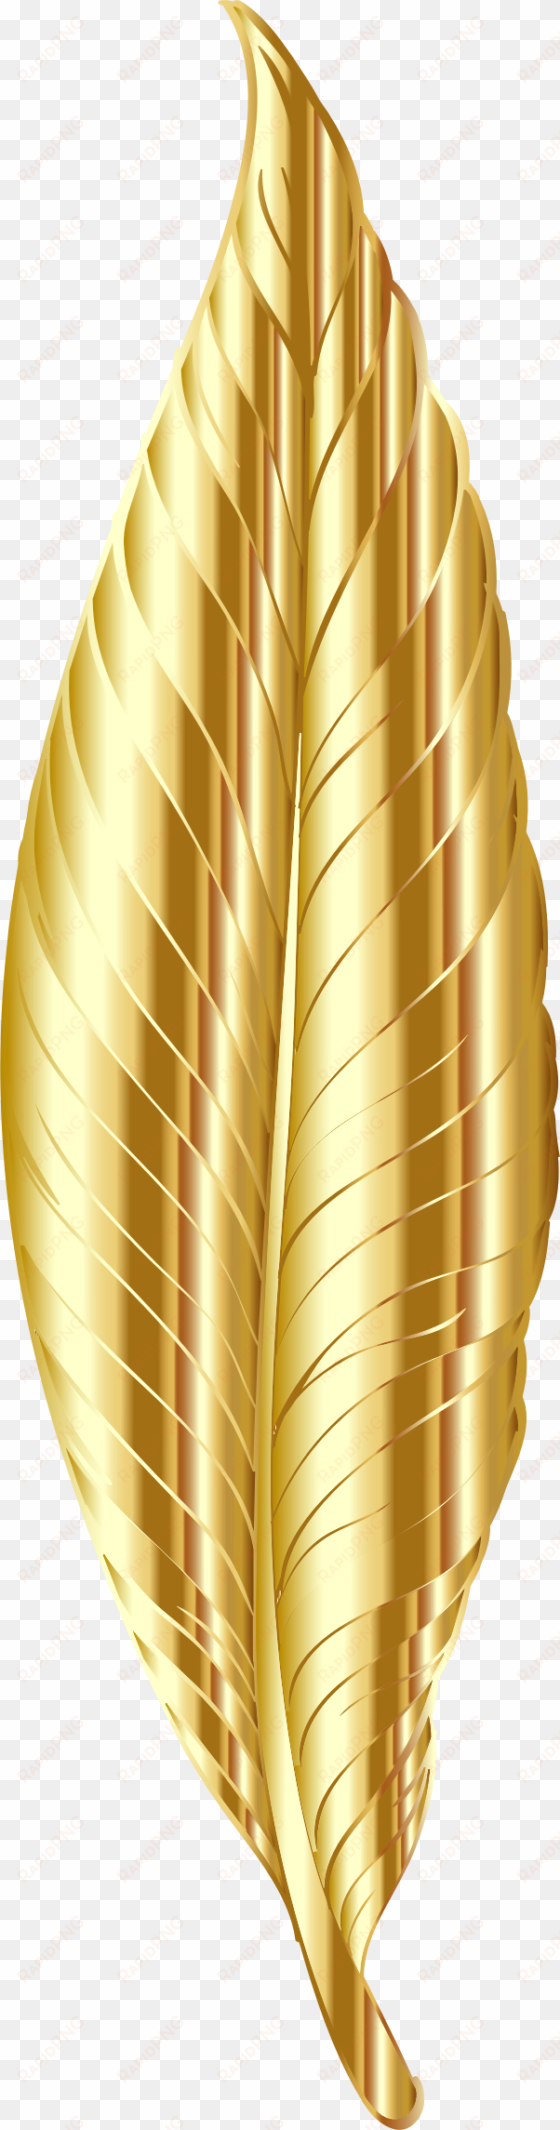 this free icons png design of gold feather